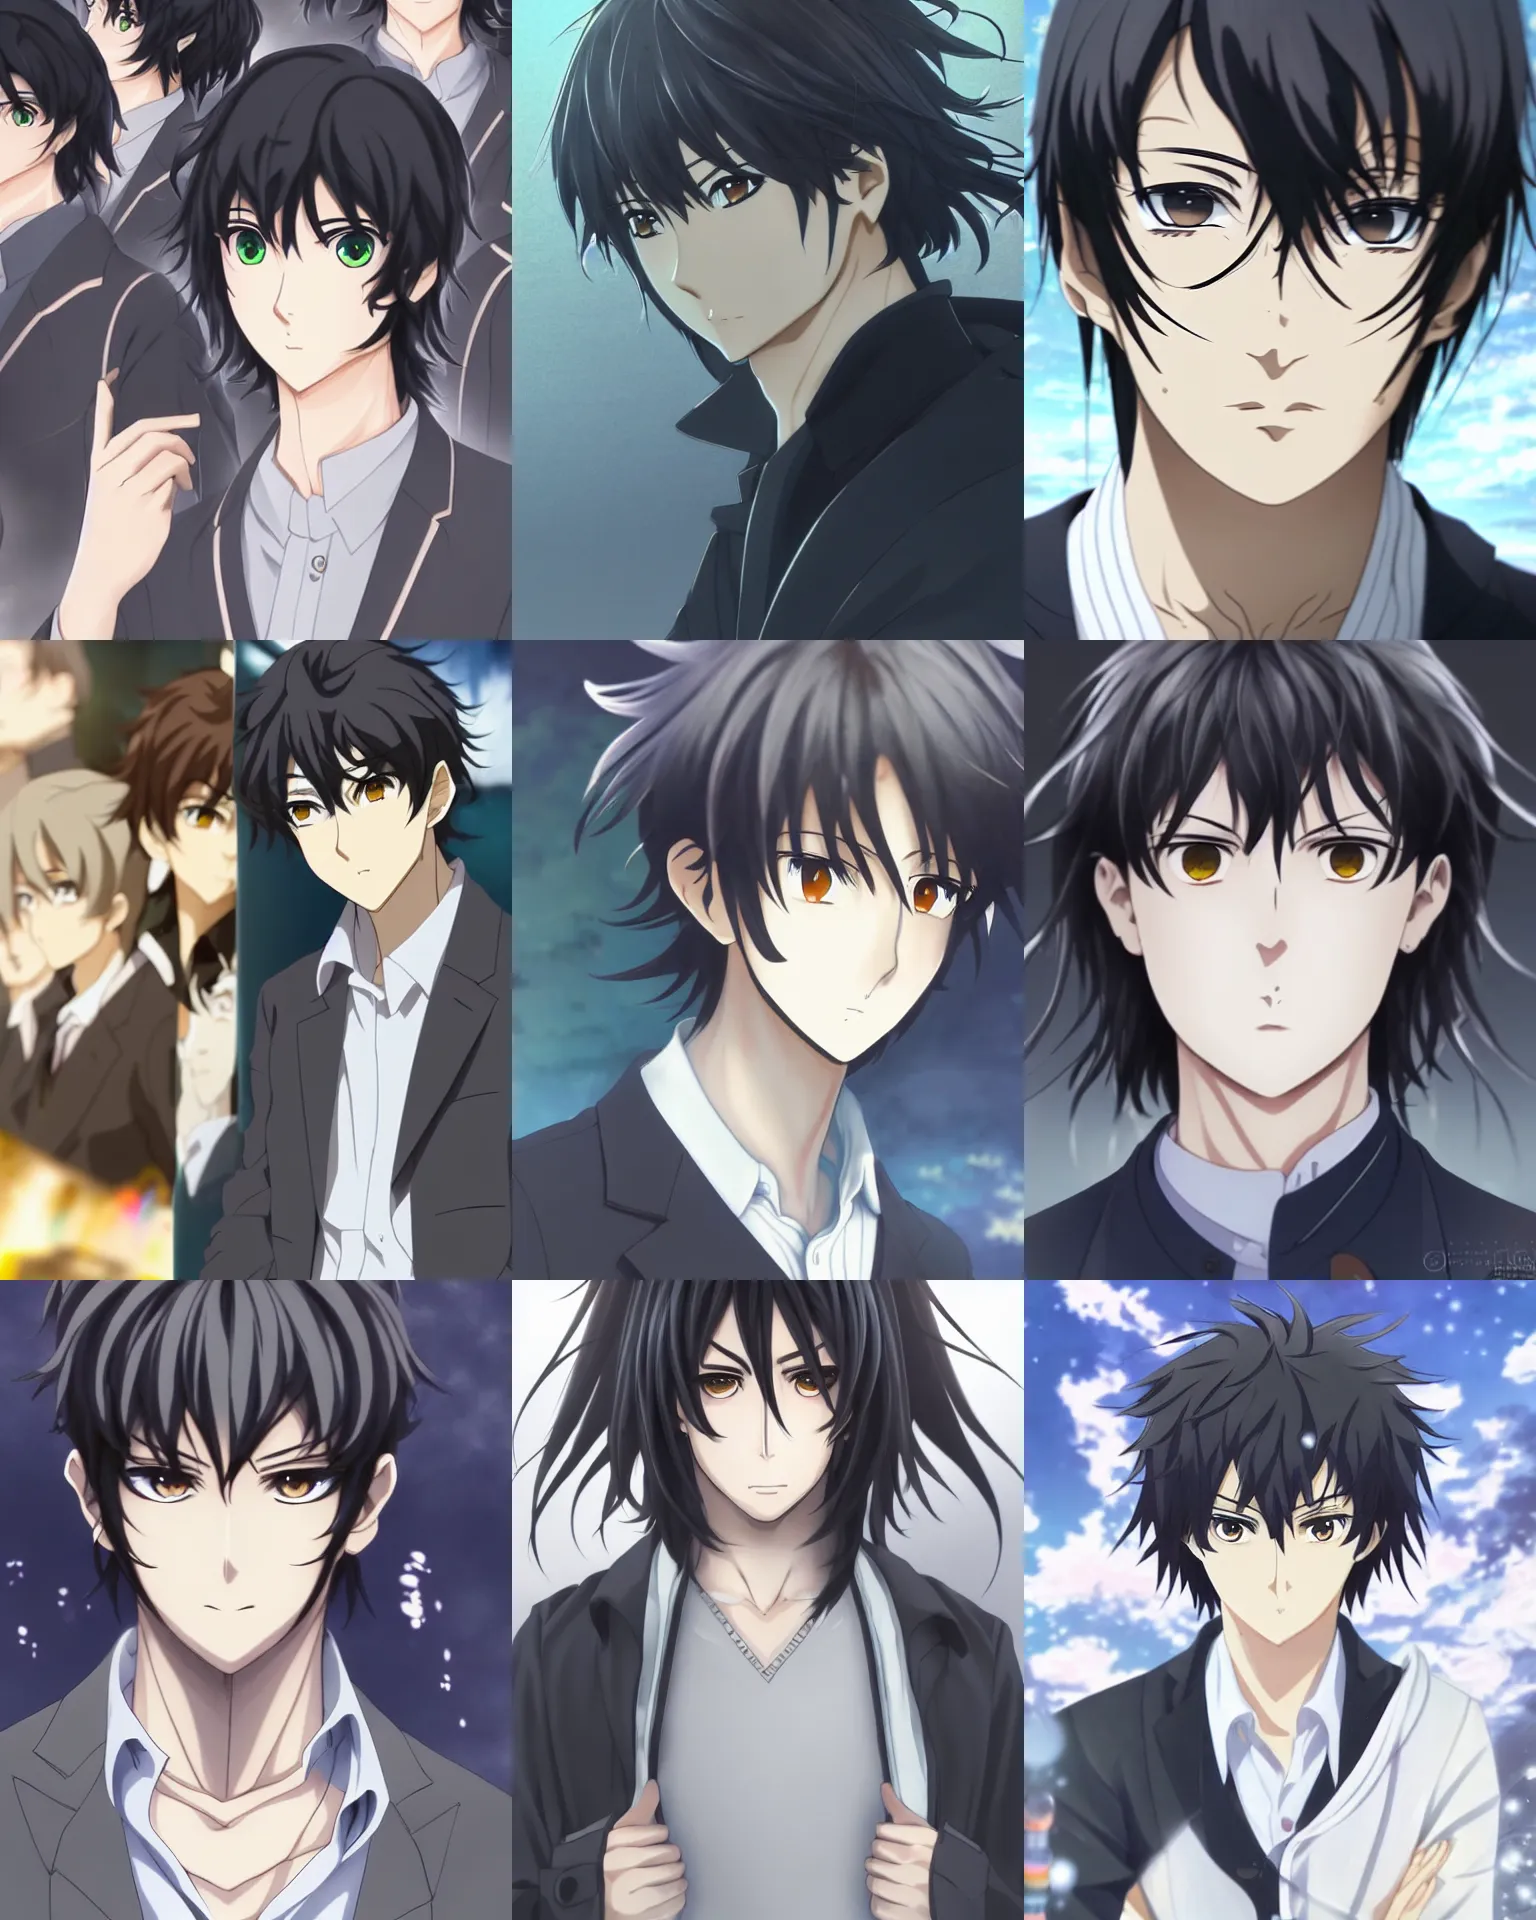 Prompt: dark grey haired man, intricate, correct facial features, anime fantasy artwork, kyoto animation, key visual